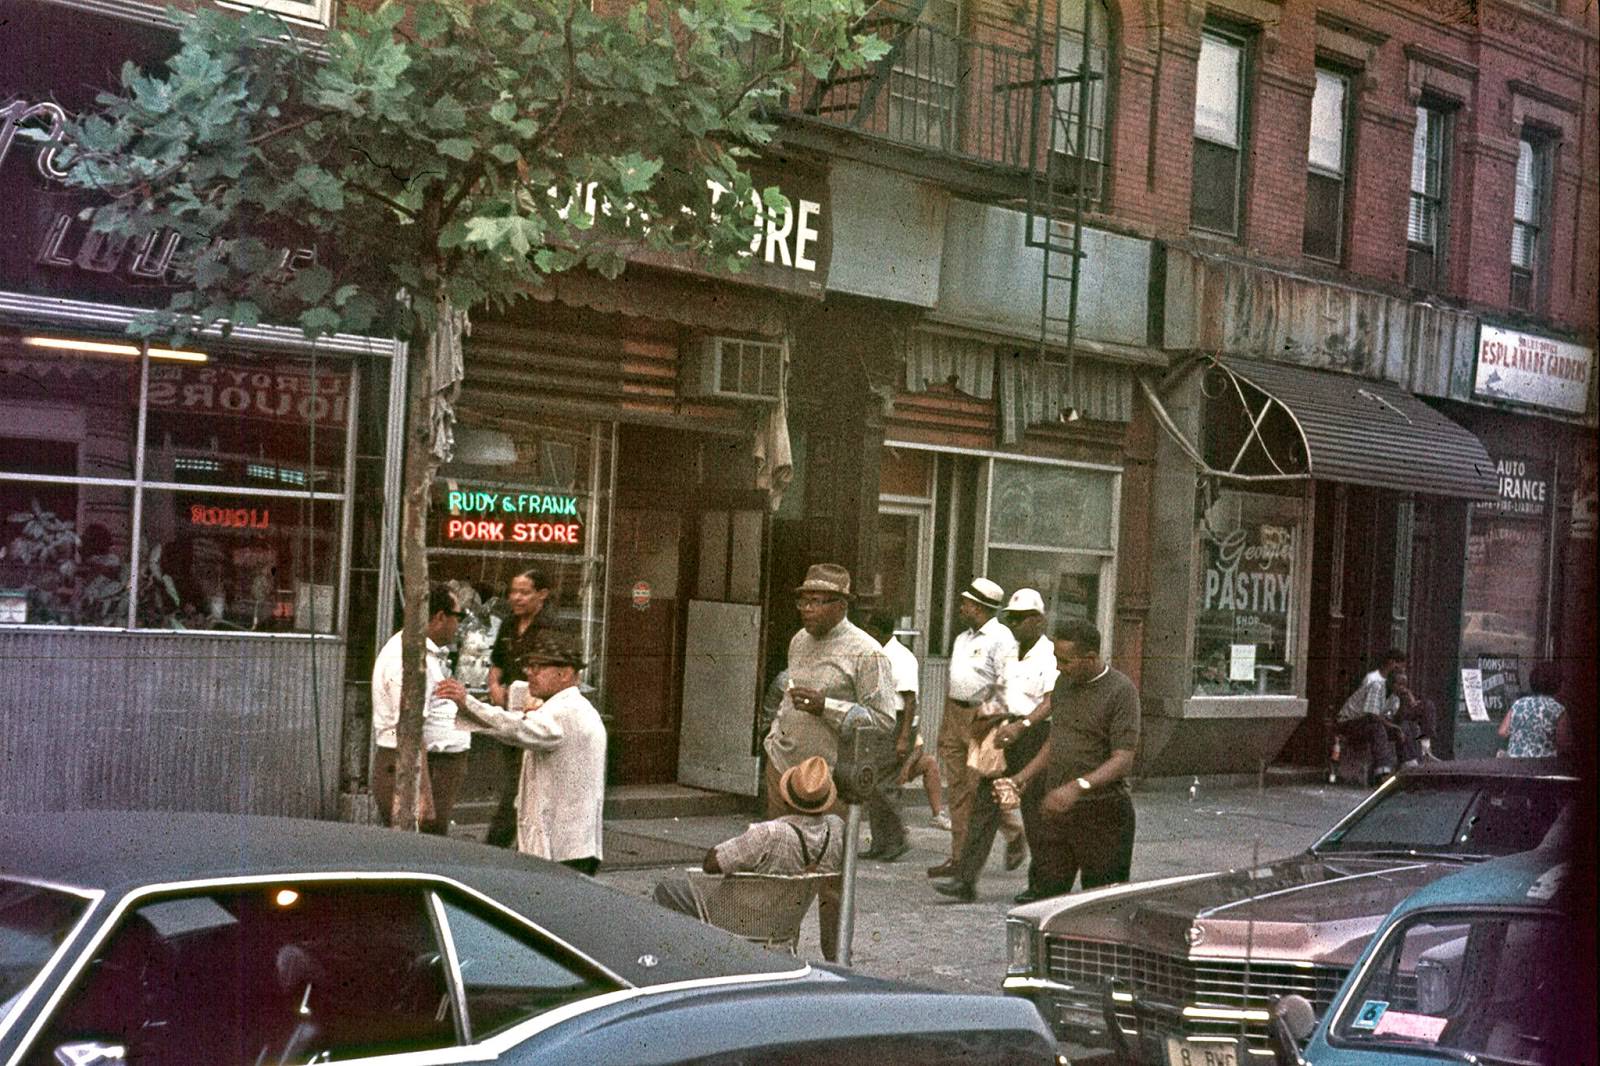 Amsterdam Avenue, between 144th Street and 145th Streets, 1971